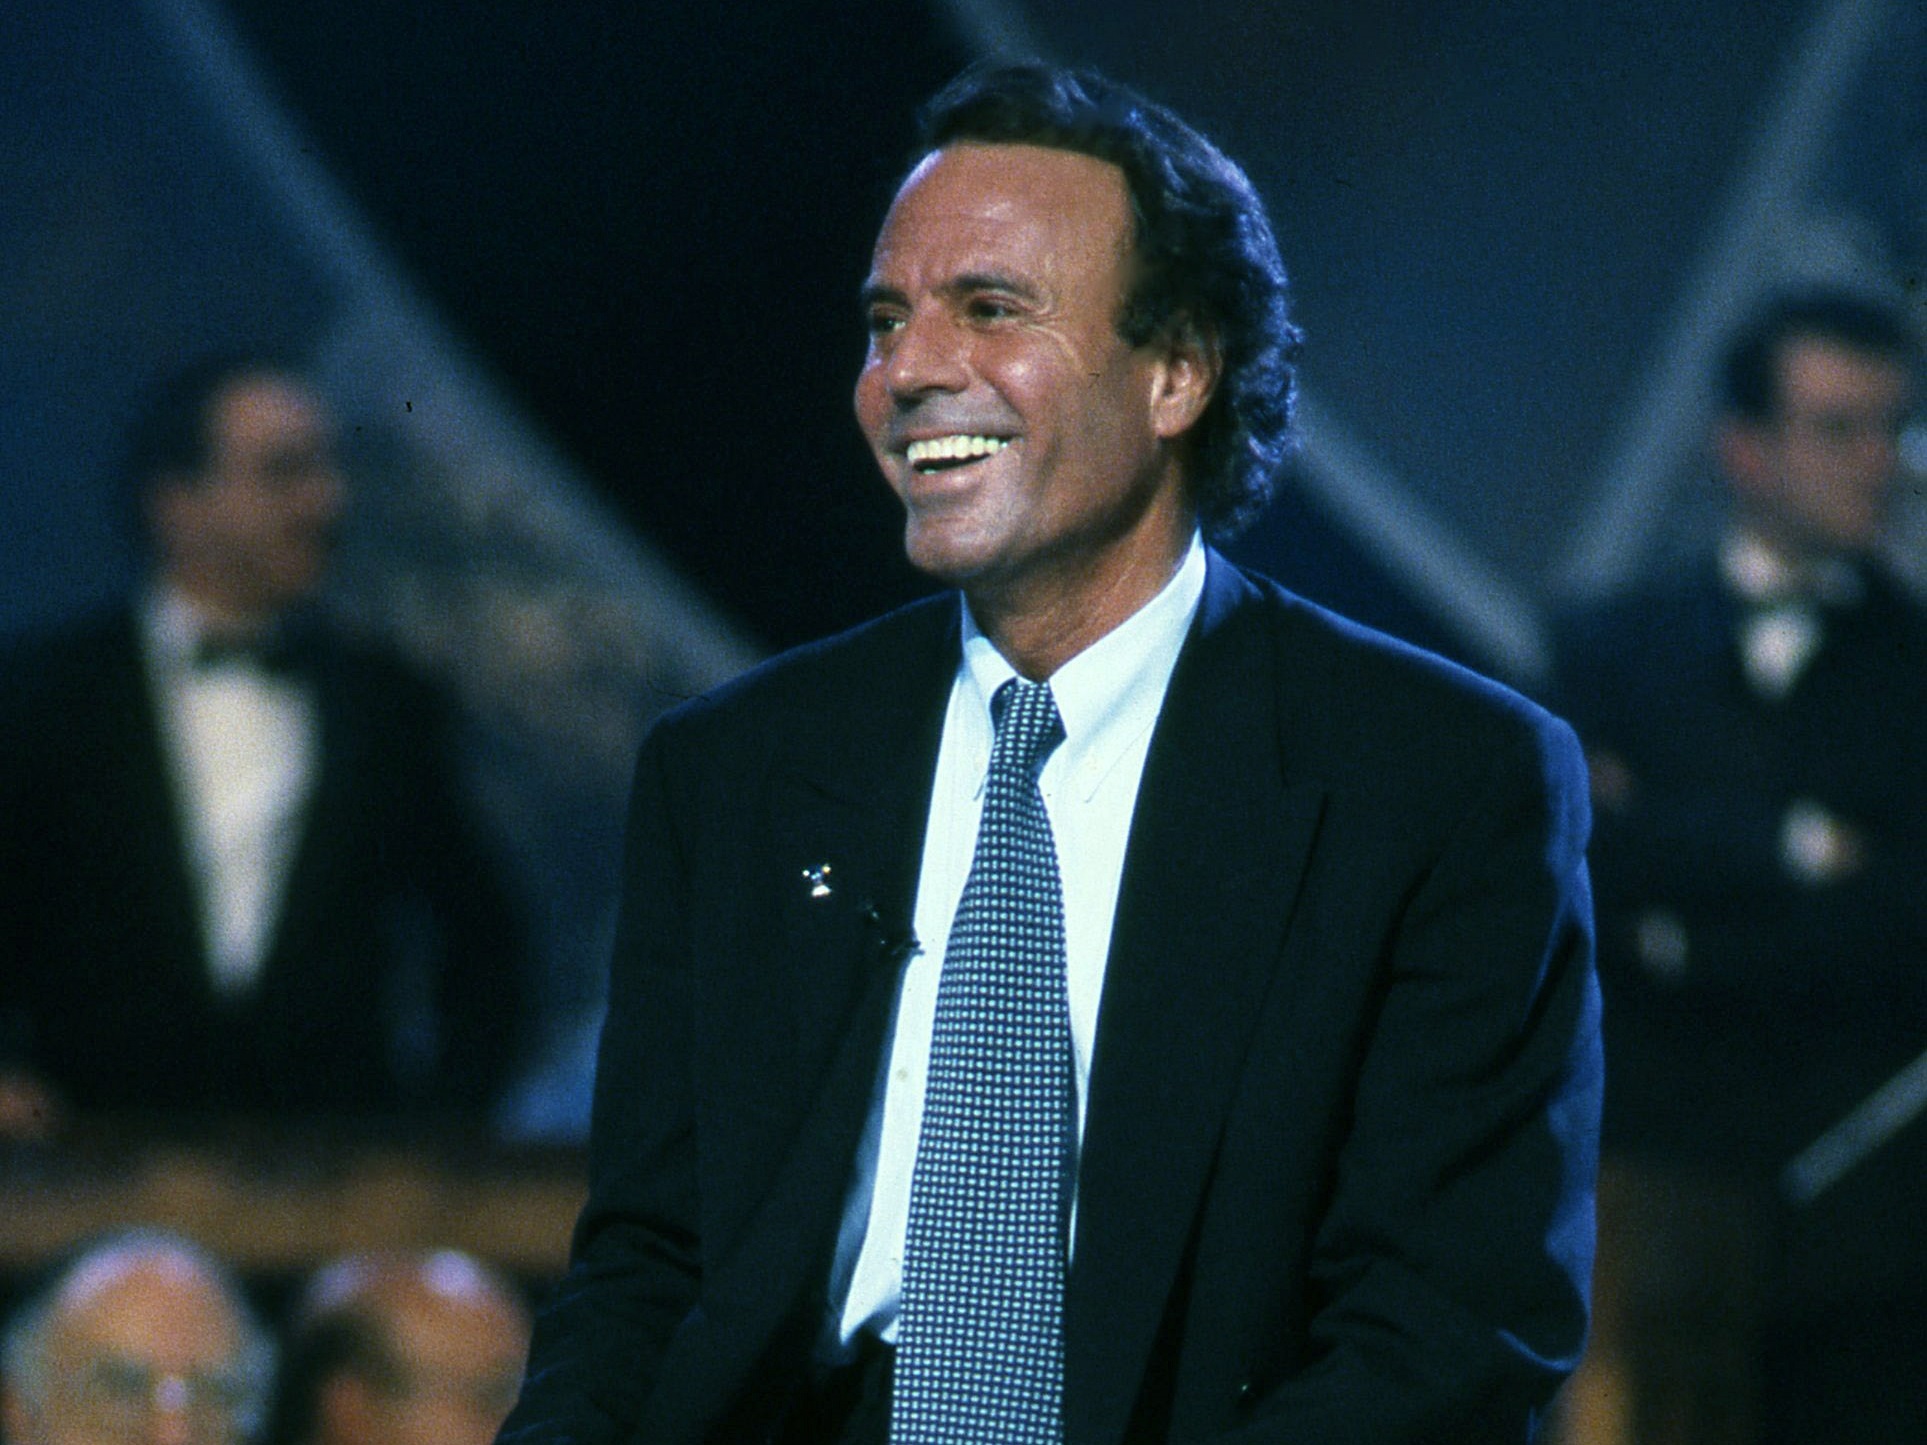 Currently Julio Iglesias is 79 years old and maintains his title of "Best-selling Latin artist in history"EUROPE SPAIN SOCIETY CONTACTPHOTO